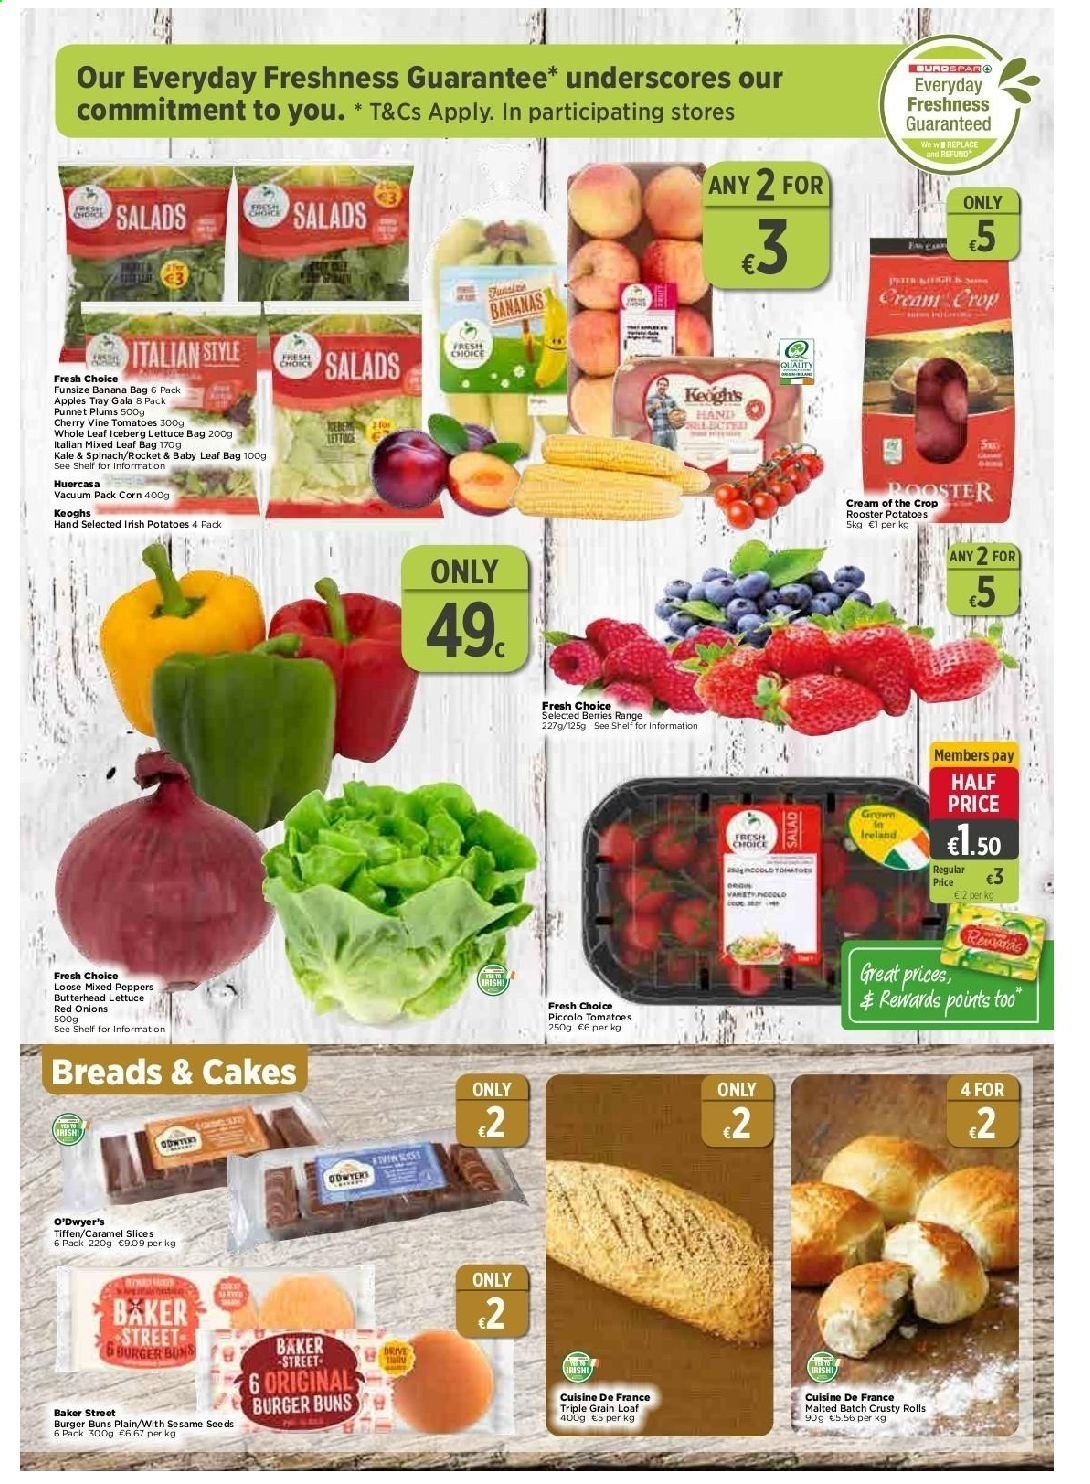 EUROSPAR offer  - 27.5.2021 - 16.6.2021 - Sales products - plums, cake, buns, burger buns, corn, red onions, rocket, potatoes, onion, lettuce, peppers, bananas, Gala apple, cherries, apples, caramel, tray. Page 3.